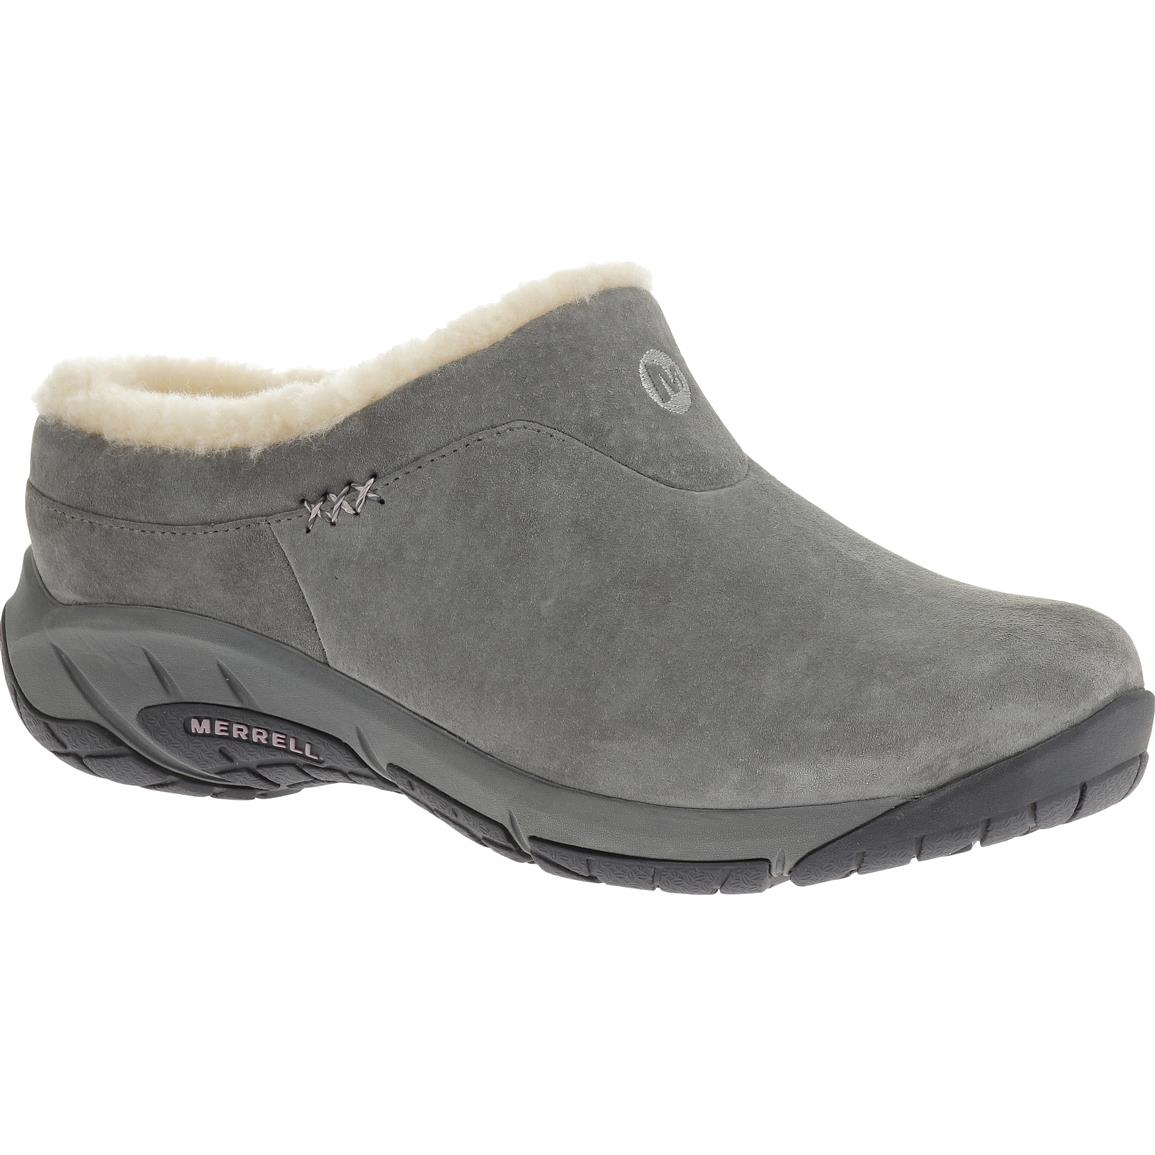 Women's Merrell Encore Ice Mocs - 654158, Casual Shoes at Sportsman's Guide